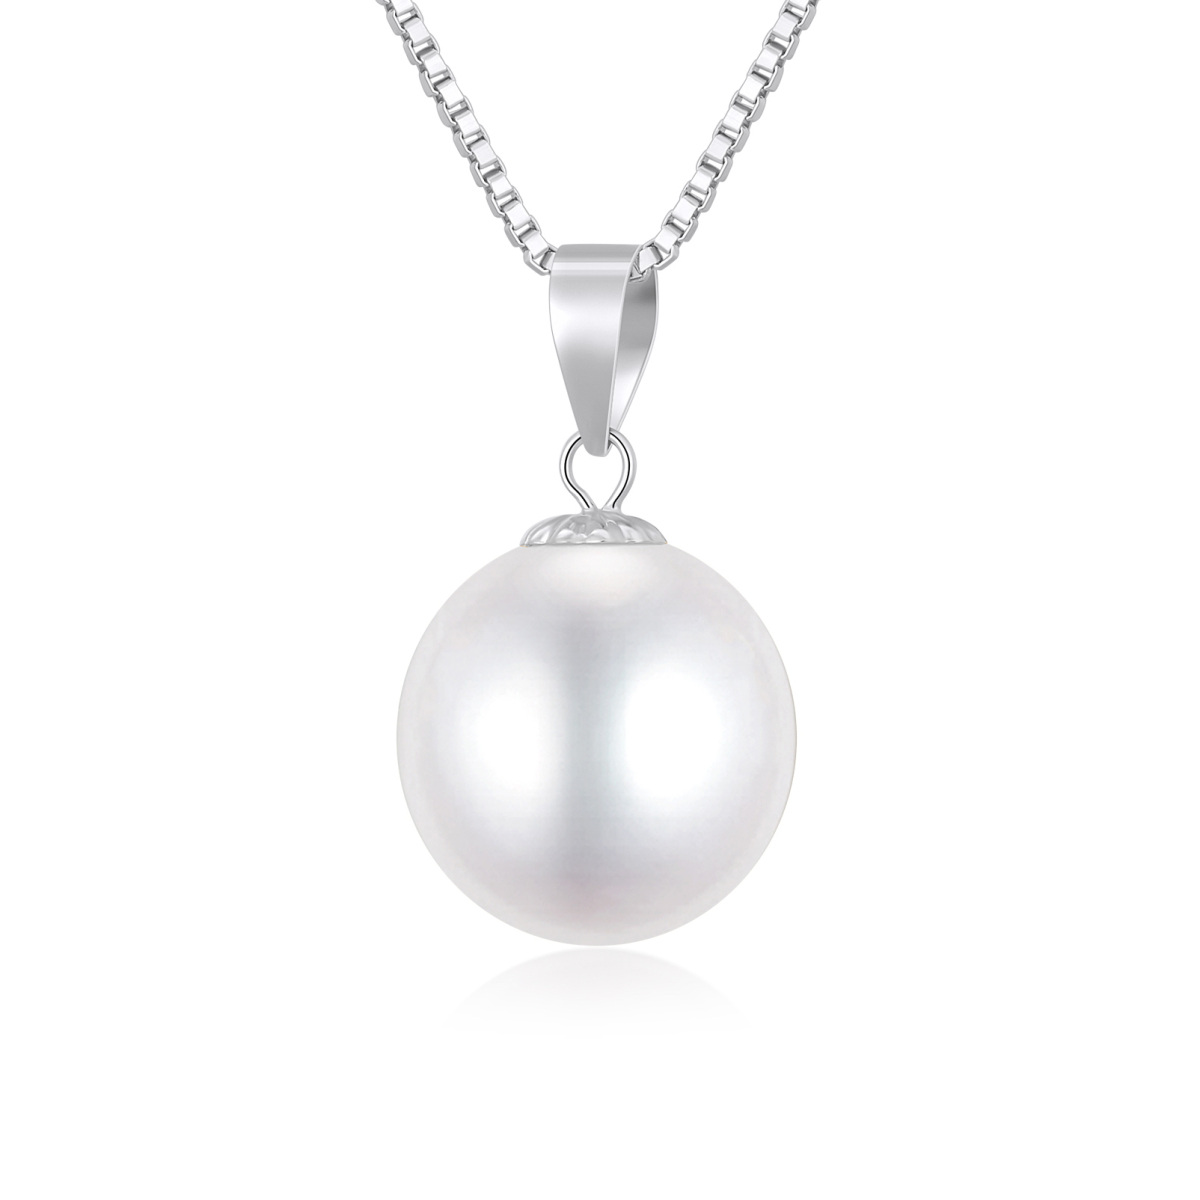 14K White Gold Circular Shaped Pearl Spherical Pendant Necklace-1